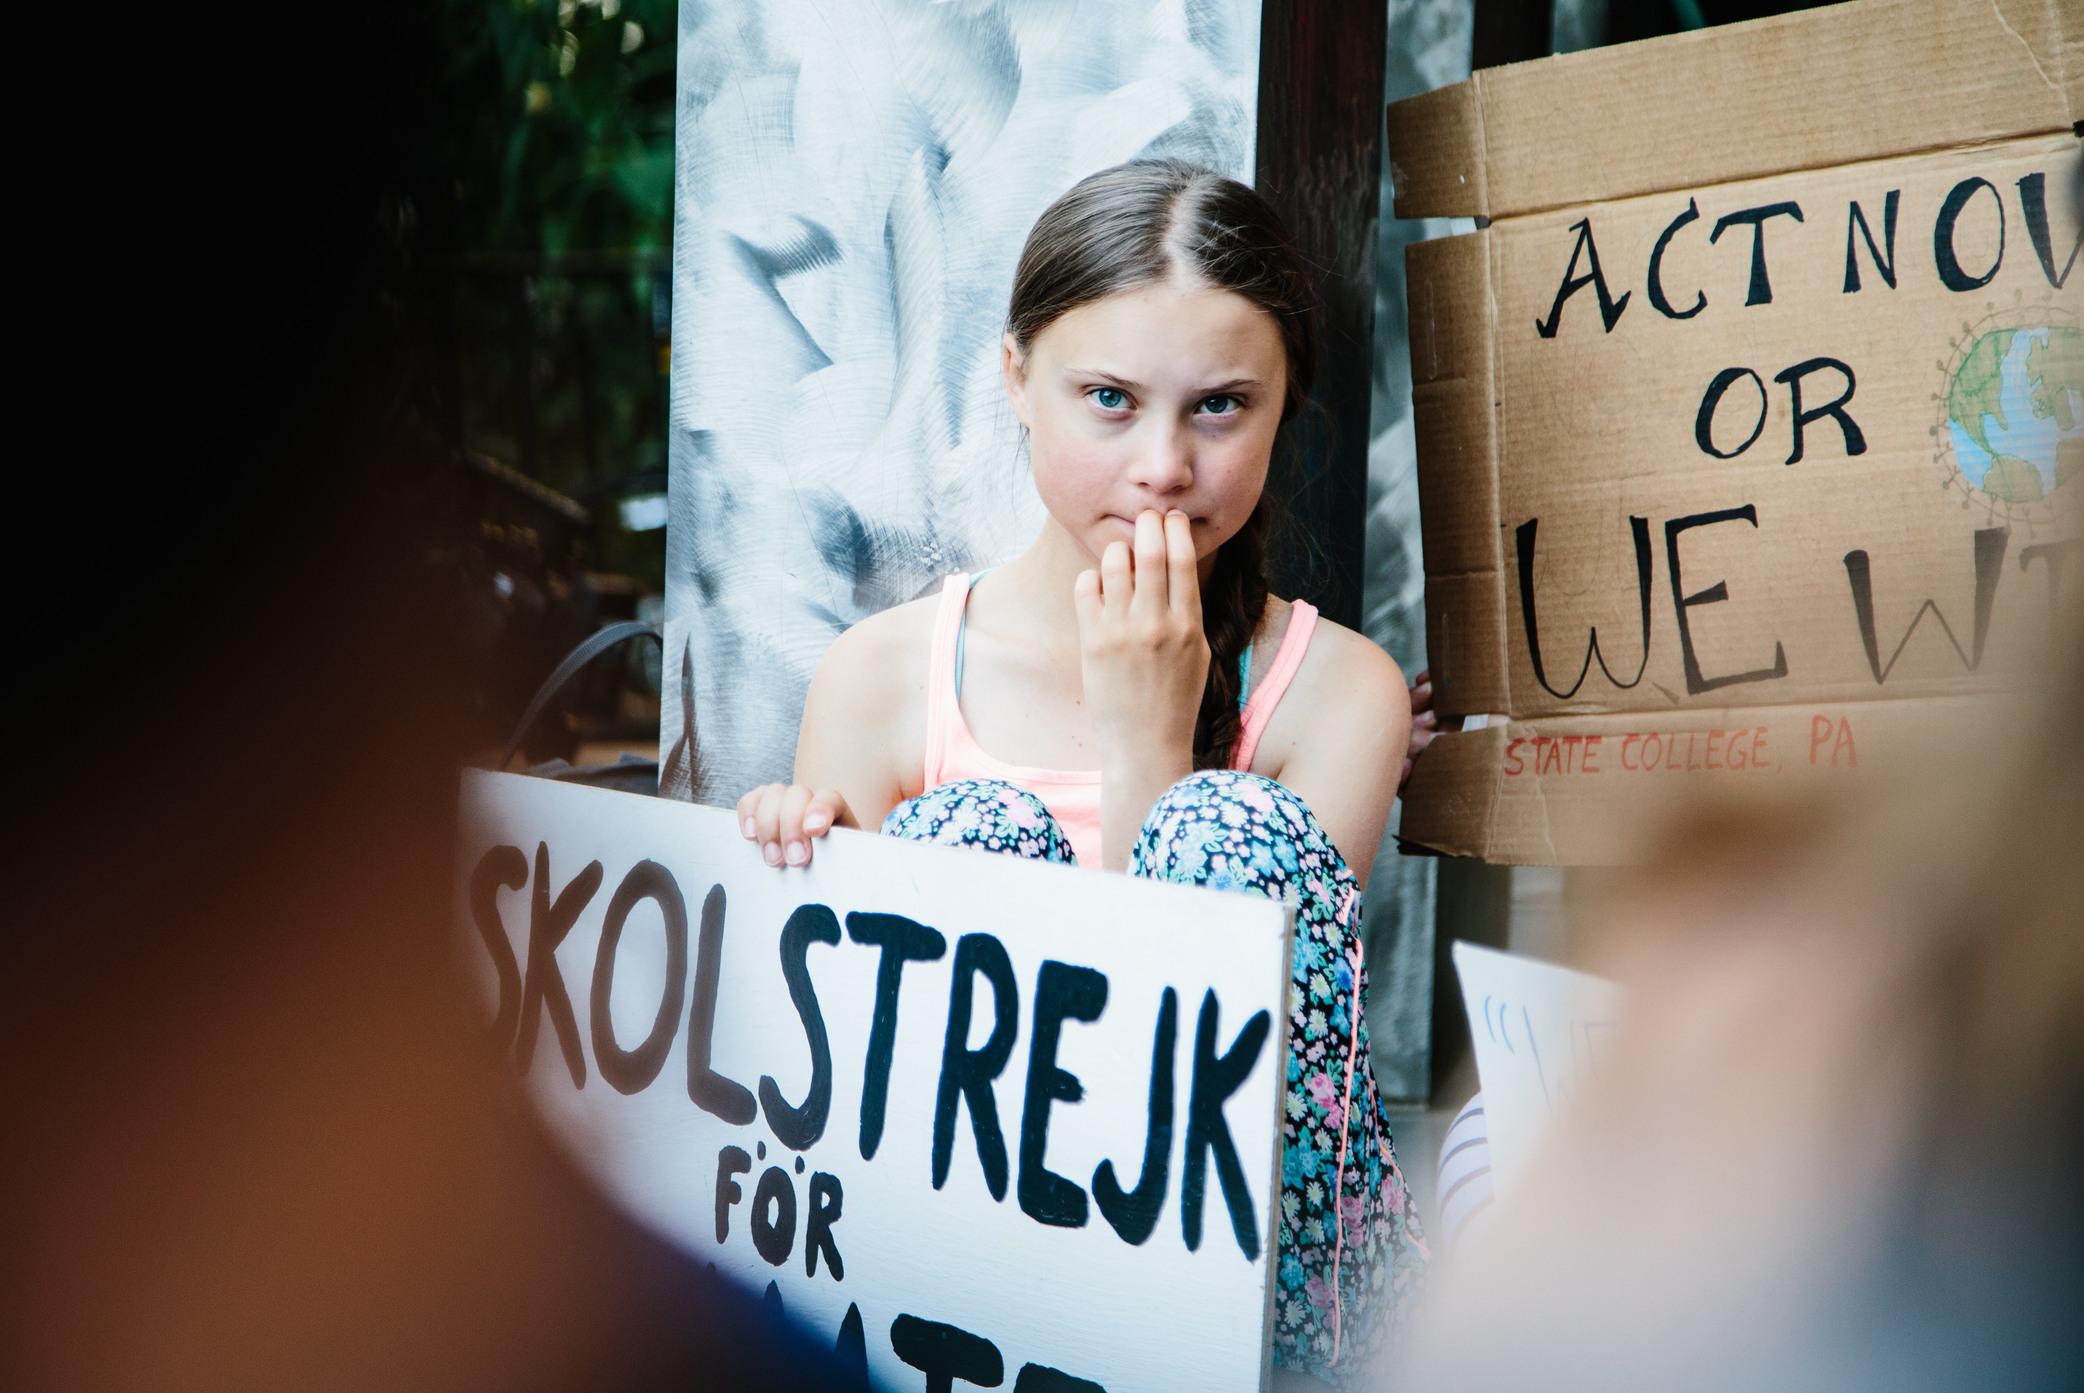 Greta Thunberg with a sign that says 'School strike for the climate'.